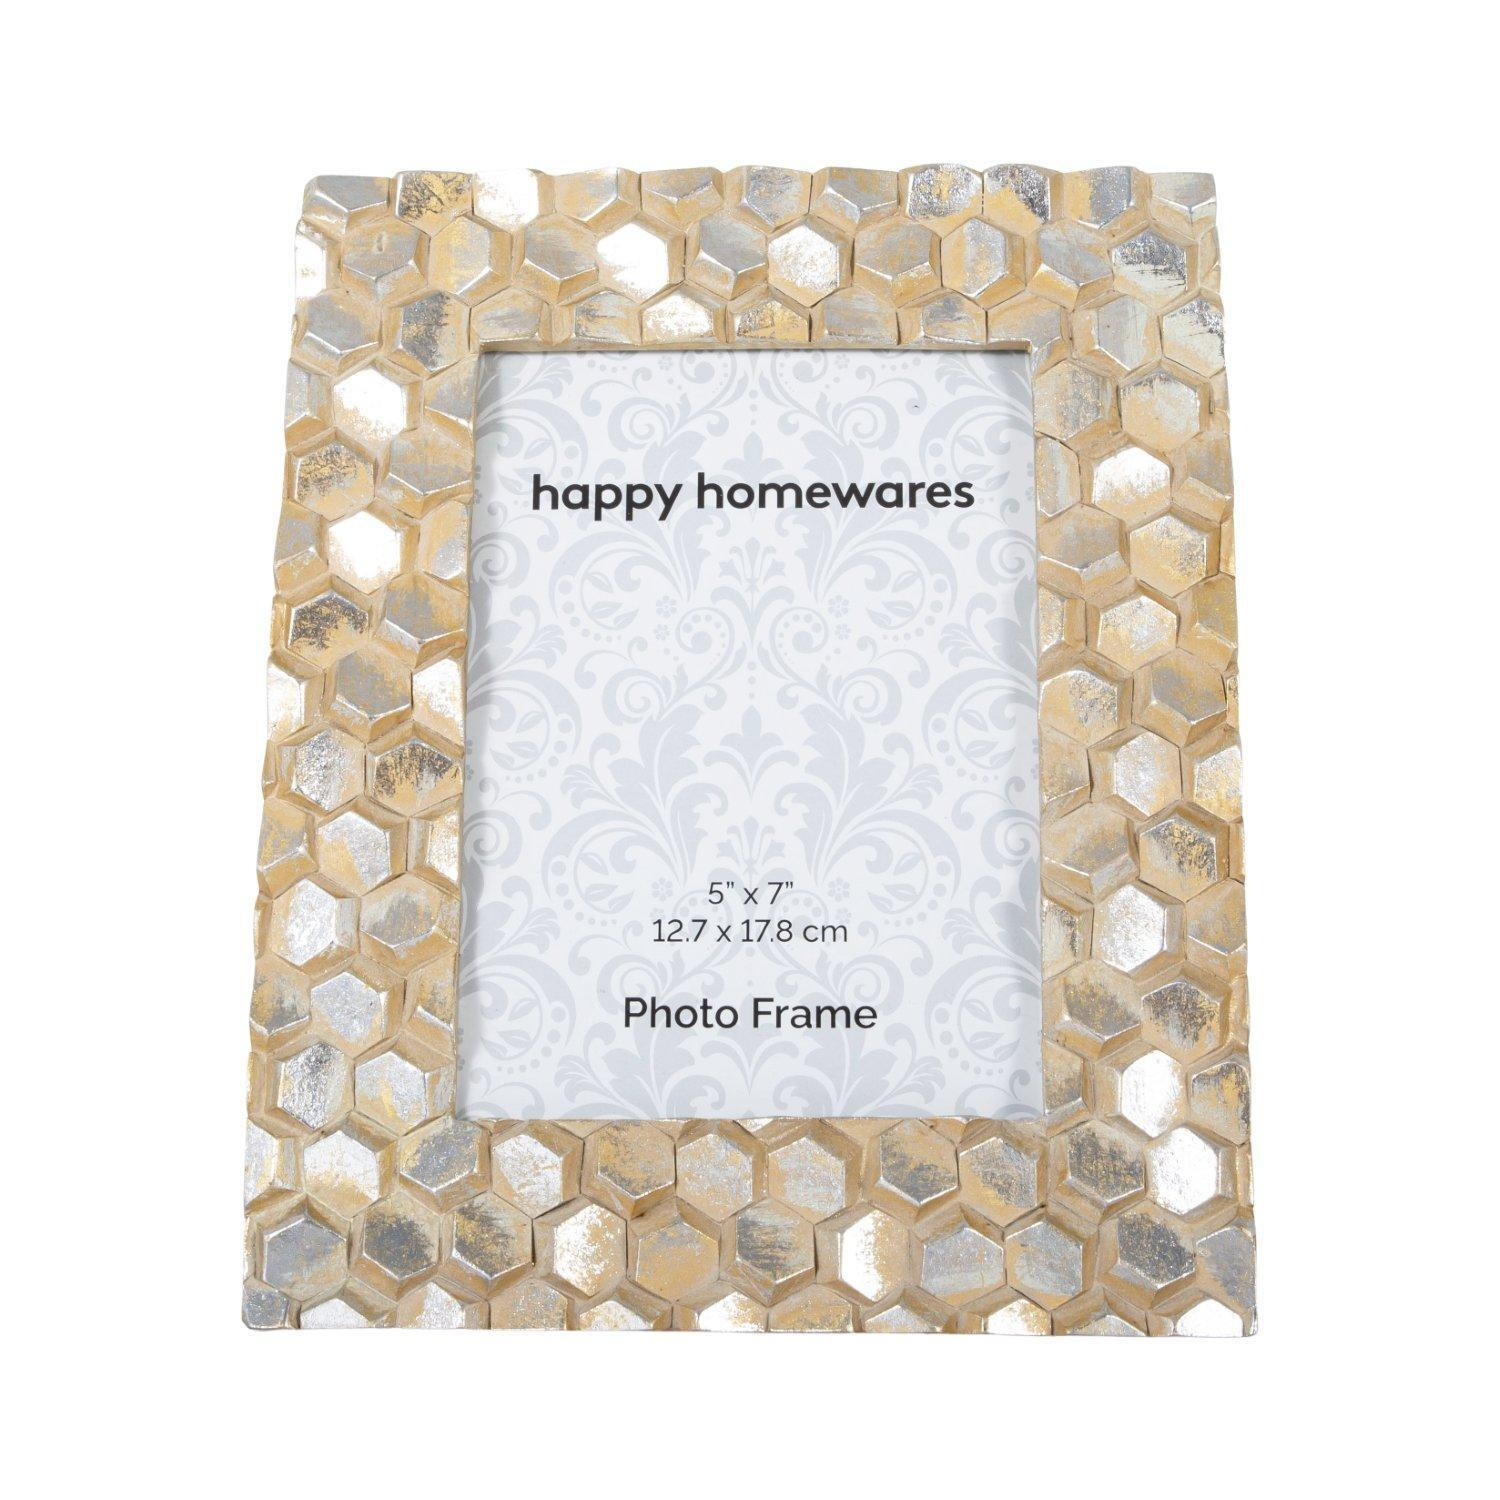 Modern Designer Rustic Gold and Silver Resin 5x7 Frame with Honeycomb Design - image 1